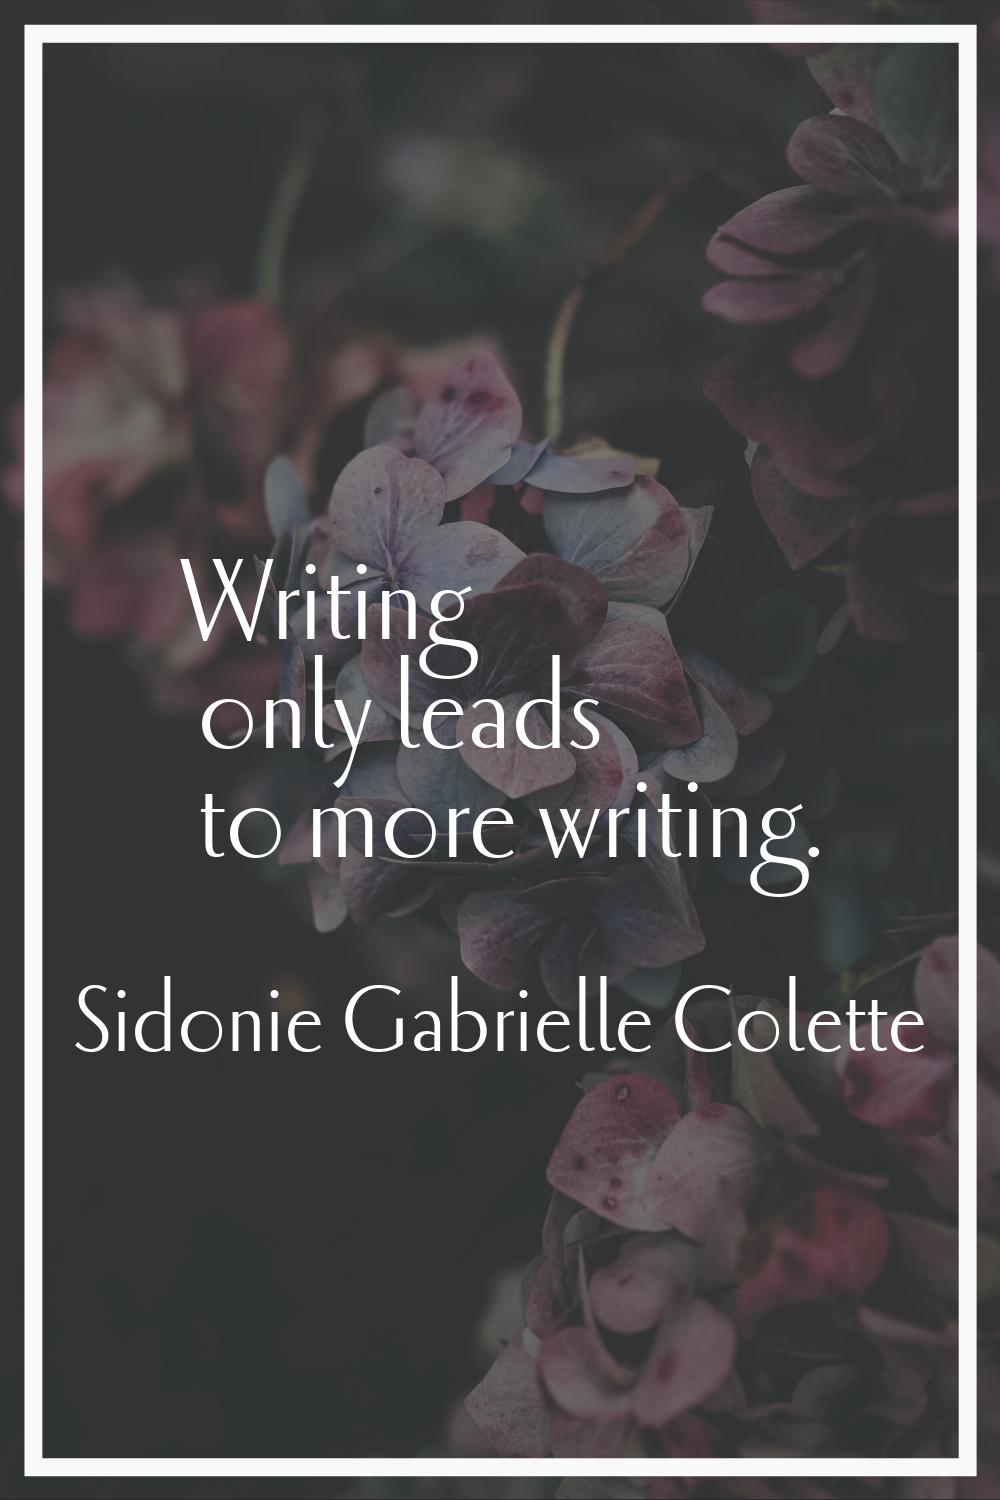 Writing only leads to more writing.